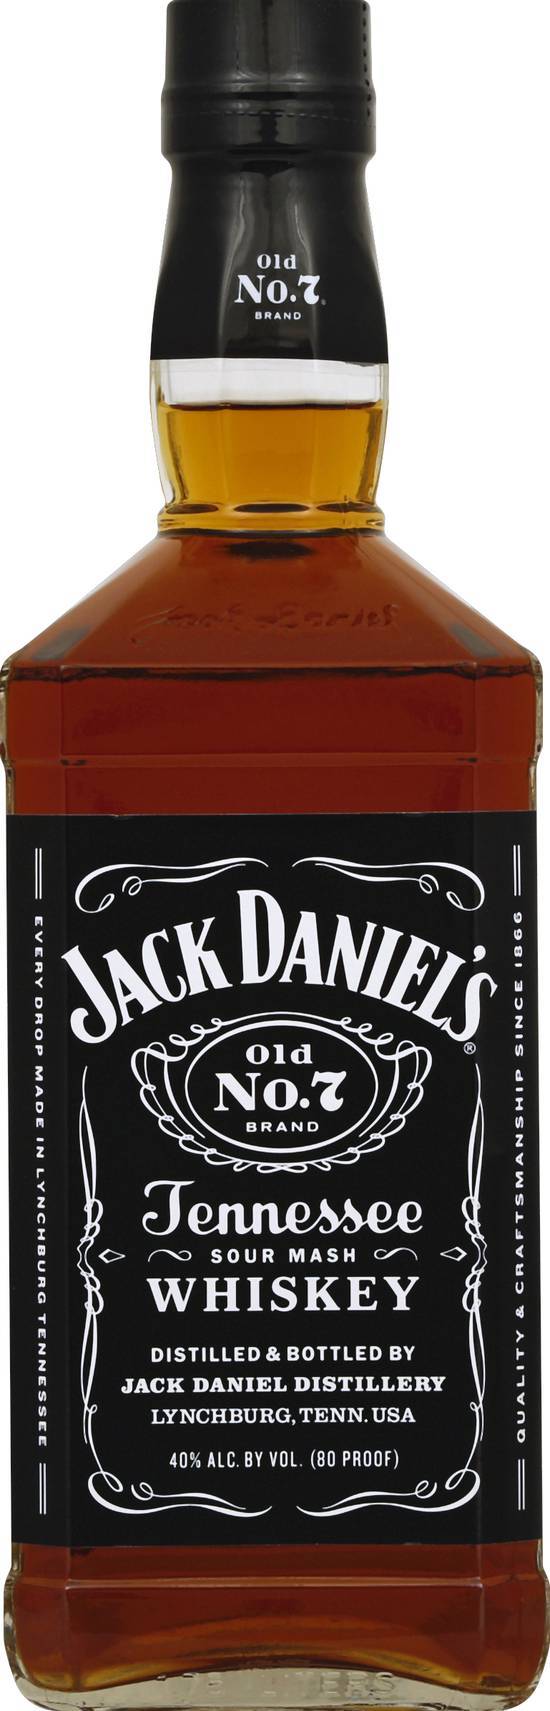 Jack Daniel's Old No. 7 Tennessee Whiskey (1.75 L)